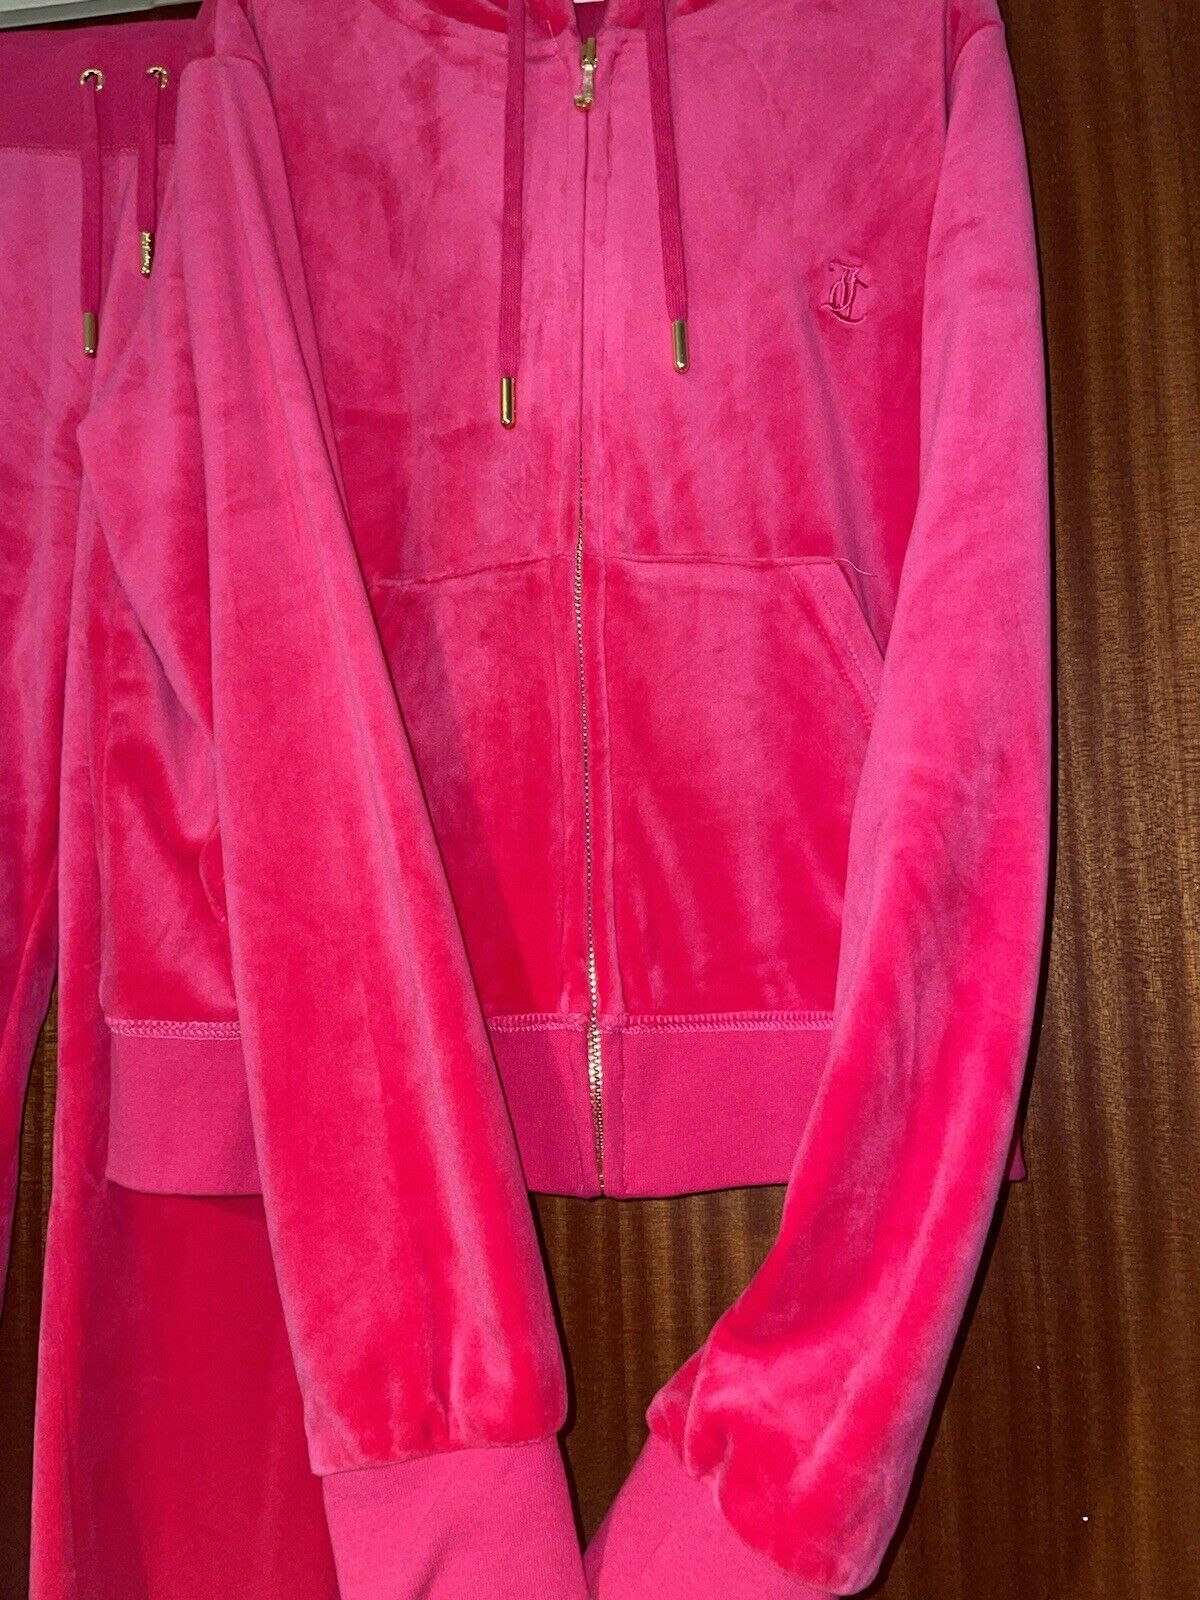 JUICY COUTURE Bright Pink Limited Edition Wide Le… - image 4